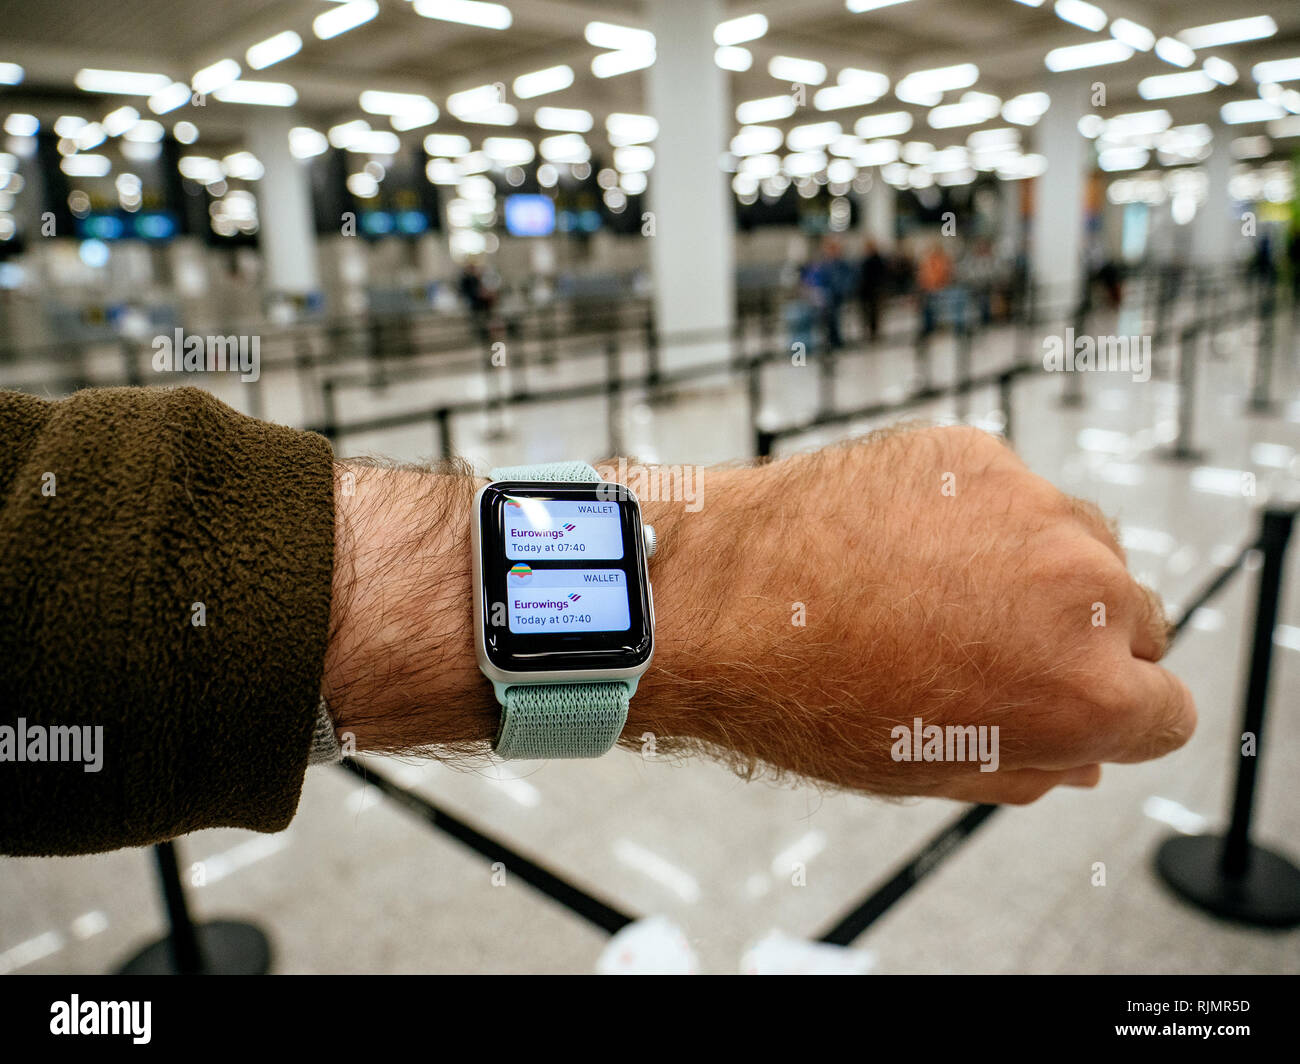 BARCELONA, SPAIN MAY 11, 2018: Crop male hand with Apple Watch Series 3  smartwatch using device while standing in light modern airport Wallet App  with Eurowings ticket Stock Photo - Alamy